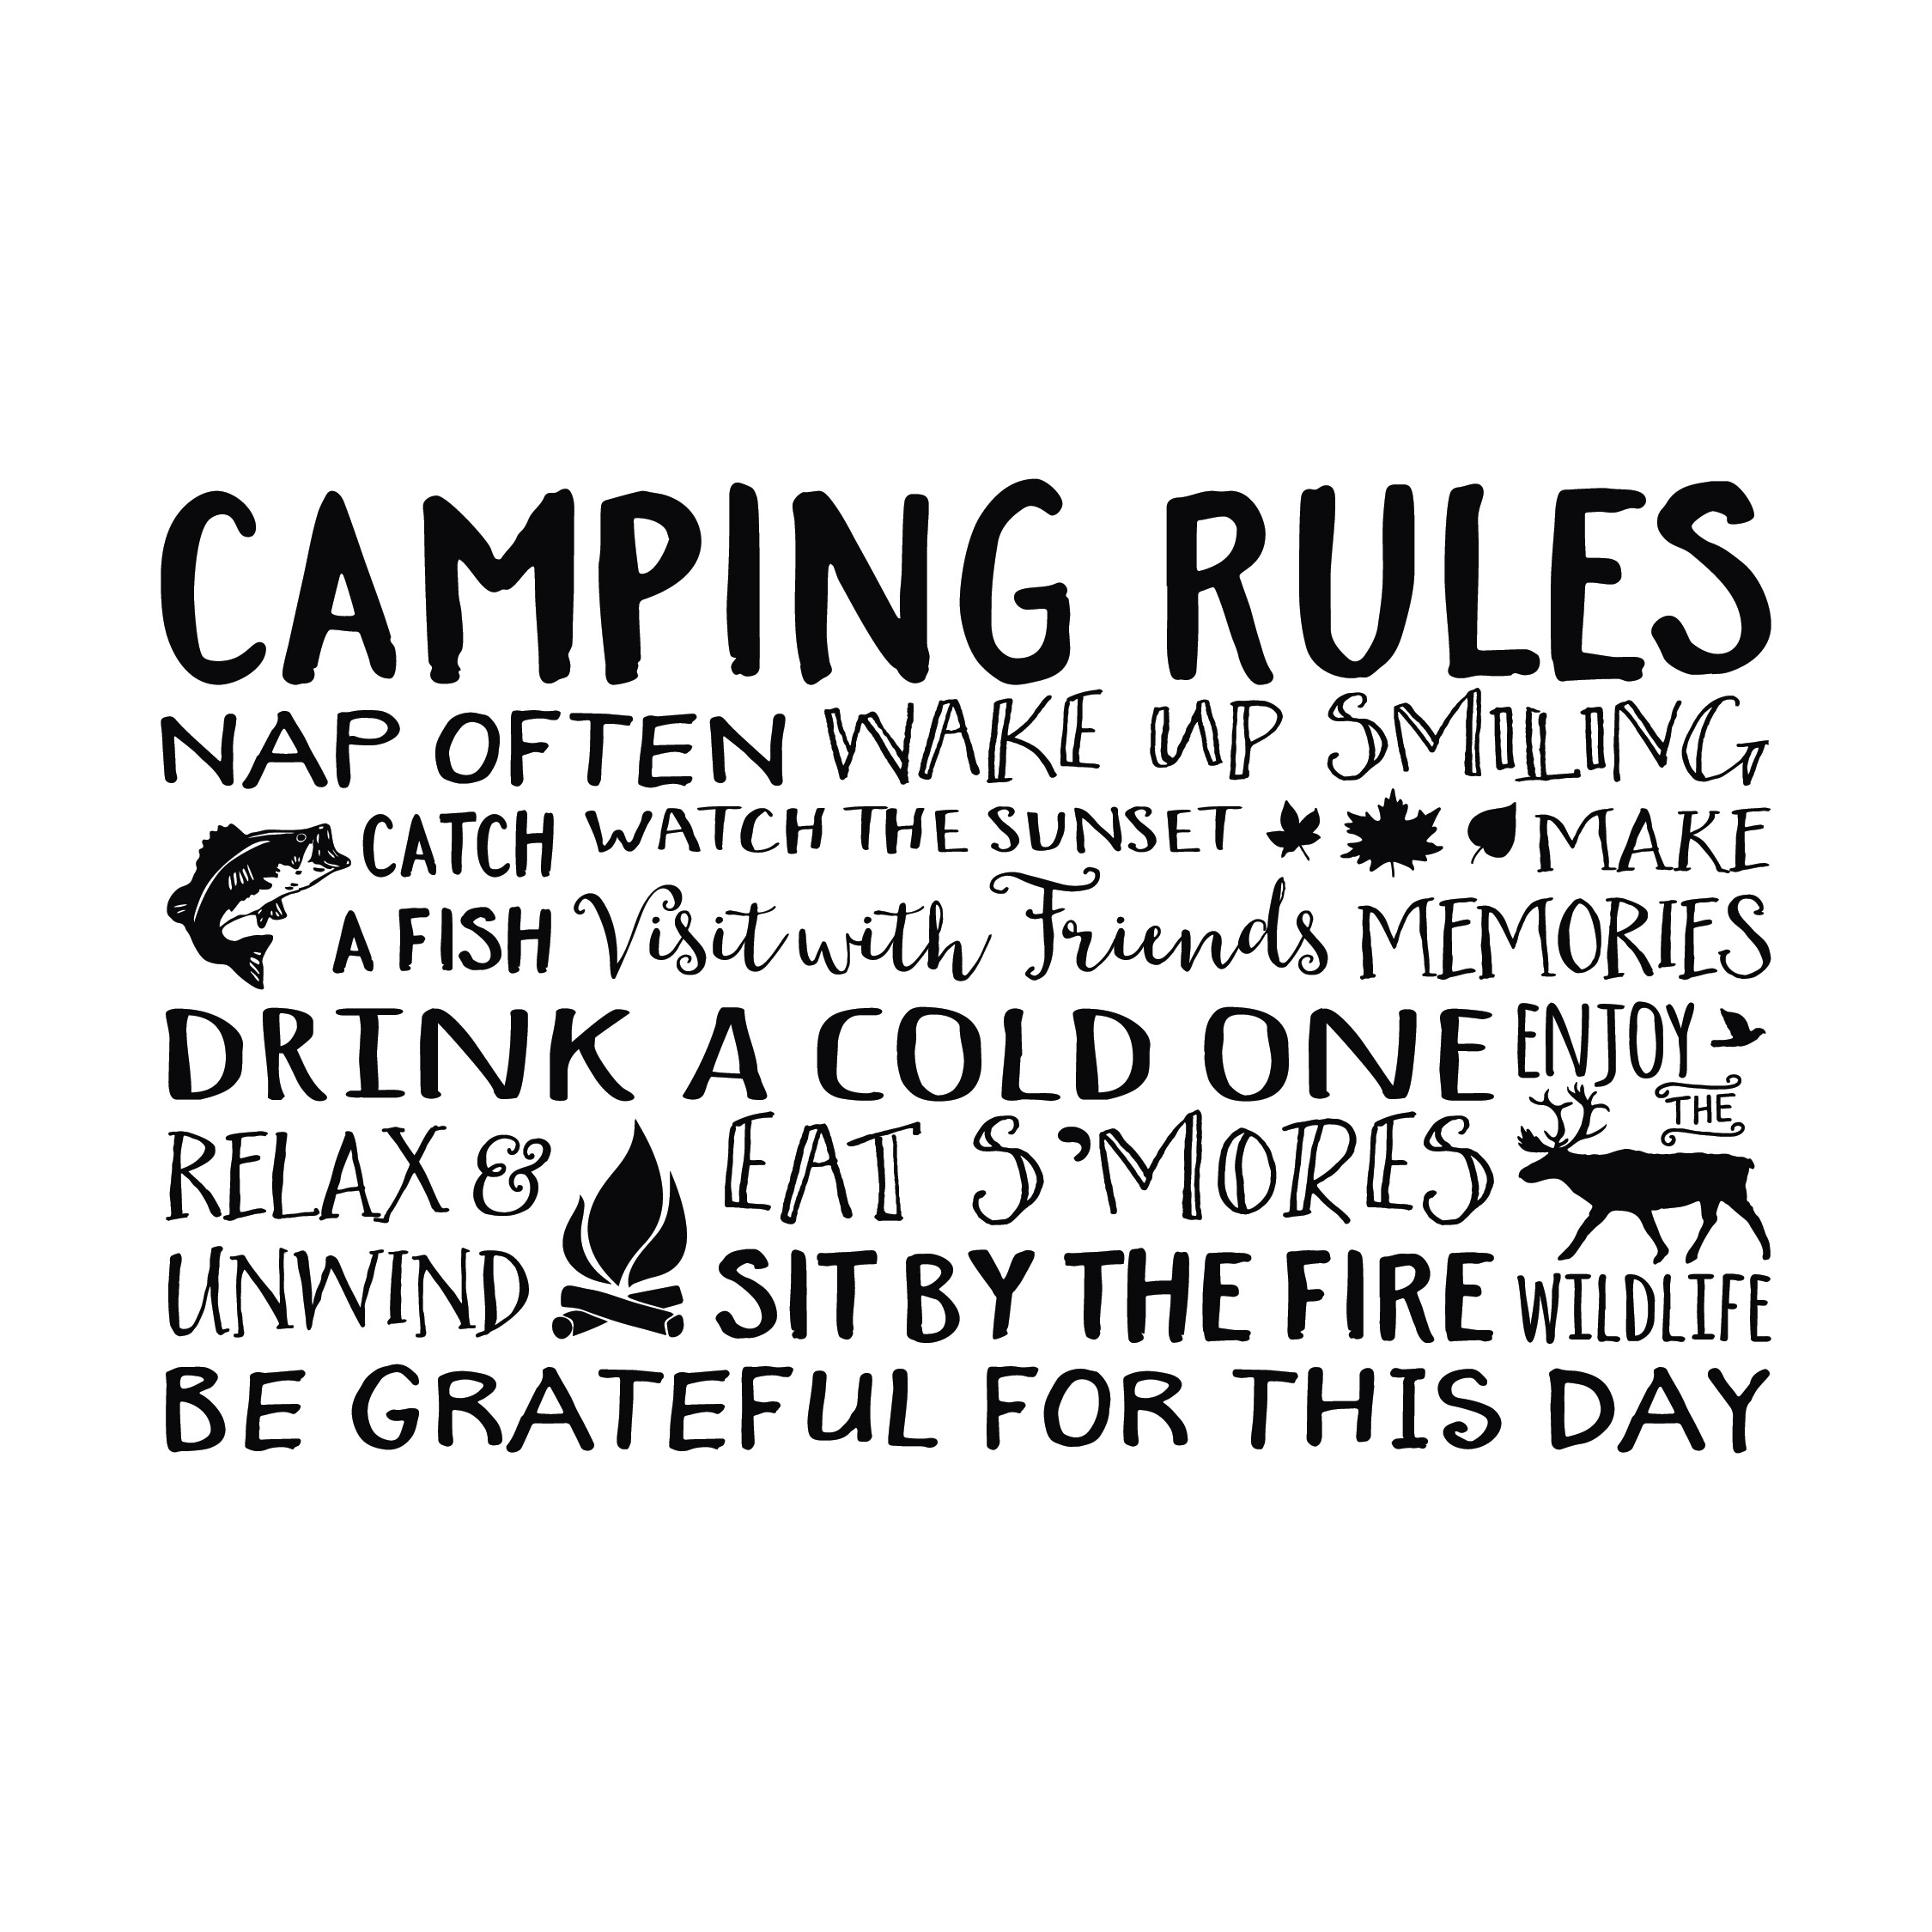 Camp Decal